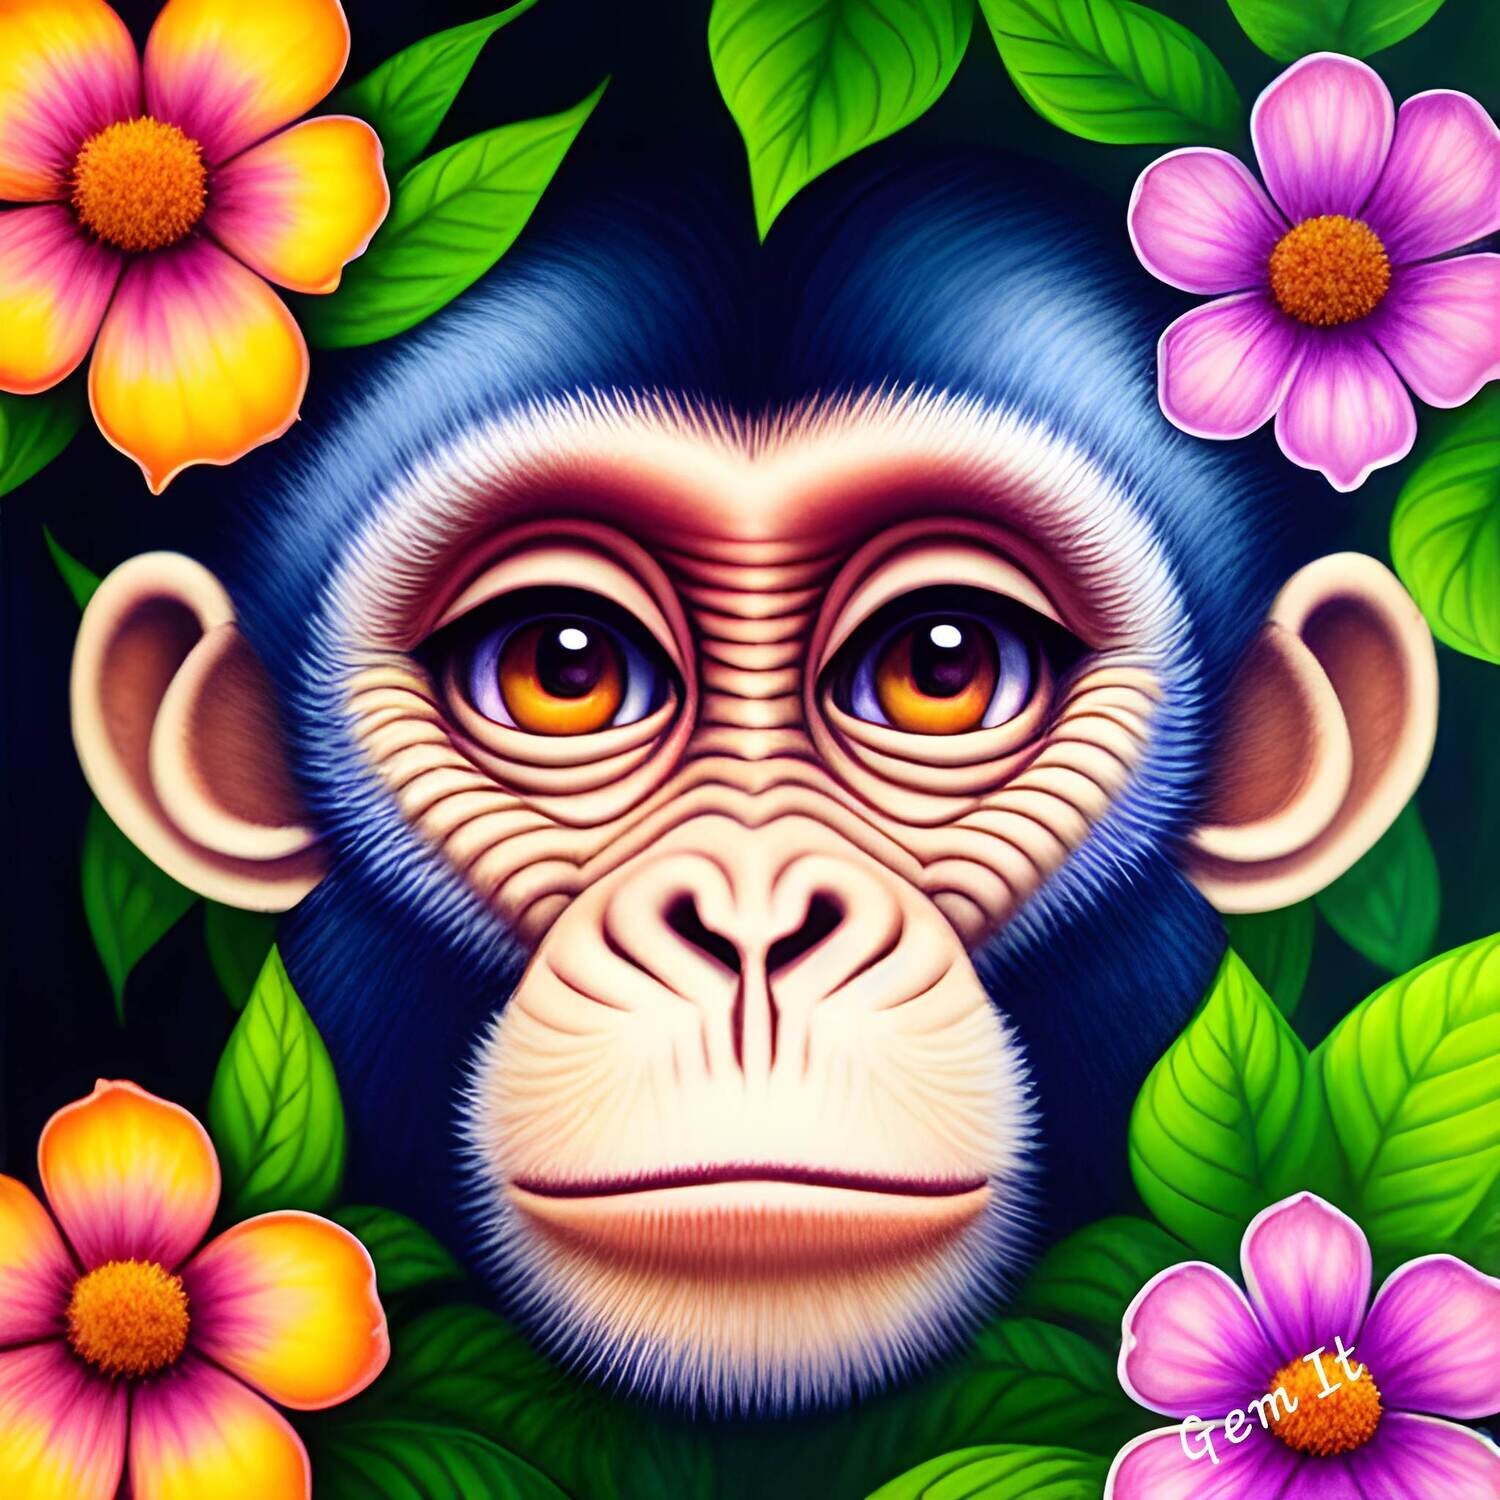 Monkey J033 - Full Drill Diamond Painting - Specially ordered for you. Delivery is approximately 4 - 6 weeks.